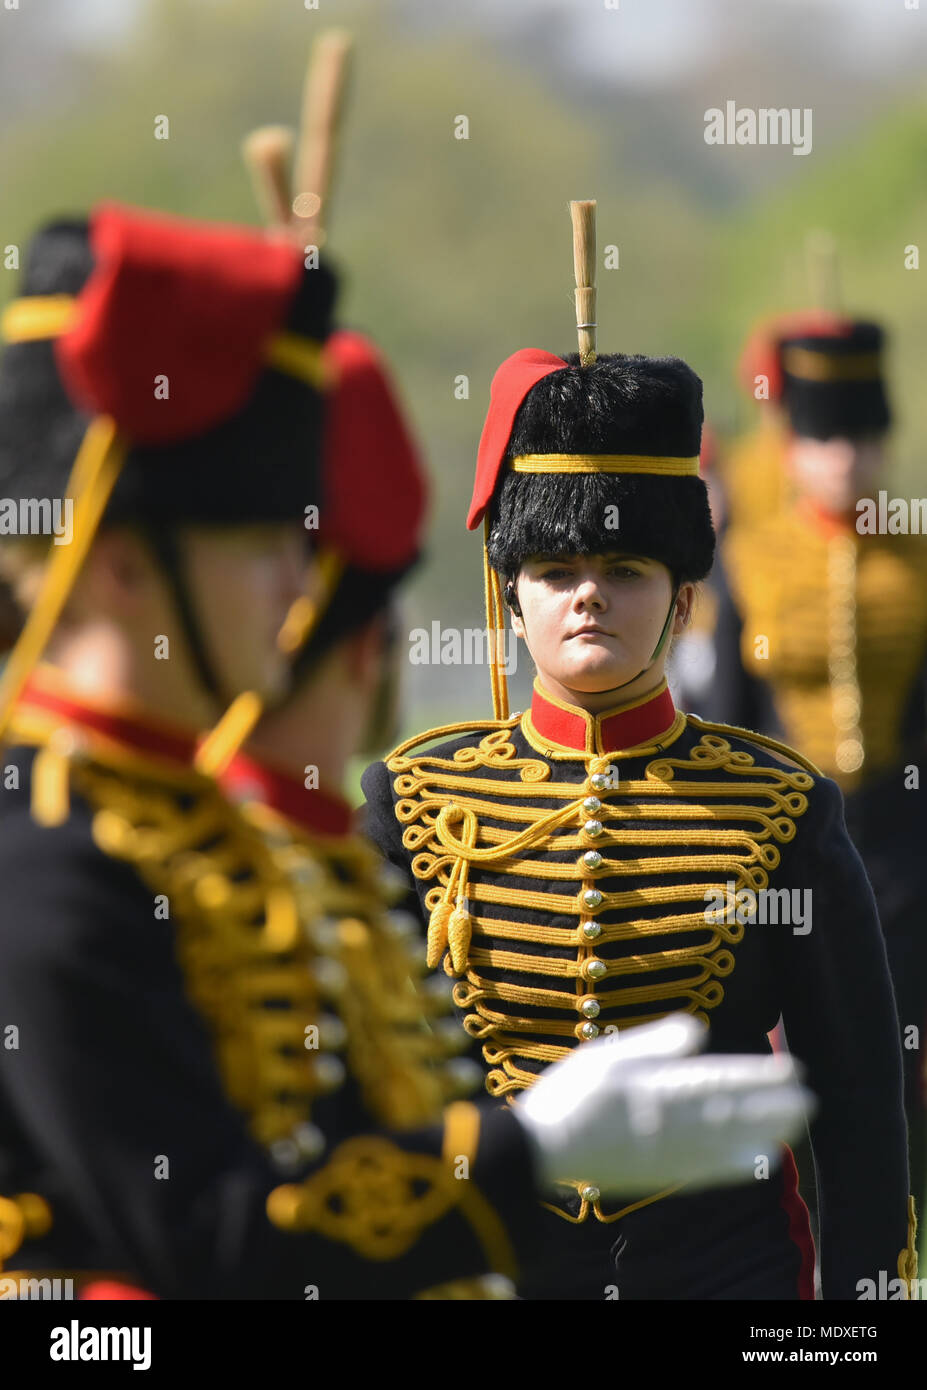 Hyde Park, London, UK. 21st April 2018. The King's Troop Royal Horse Artillery fire a 41 gun salute to mark the Queen's 92nd birthday. Credit: Matthew Chattle/Alamy Live News Credit: Matthew Chattle/Alamy Live News Stock Photo